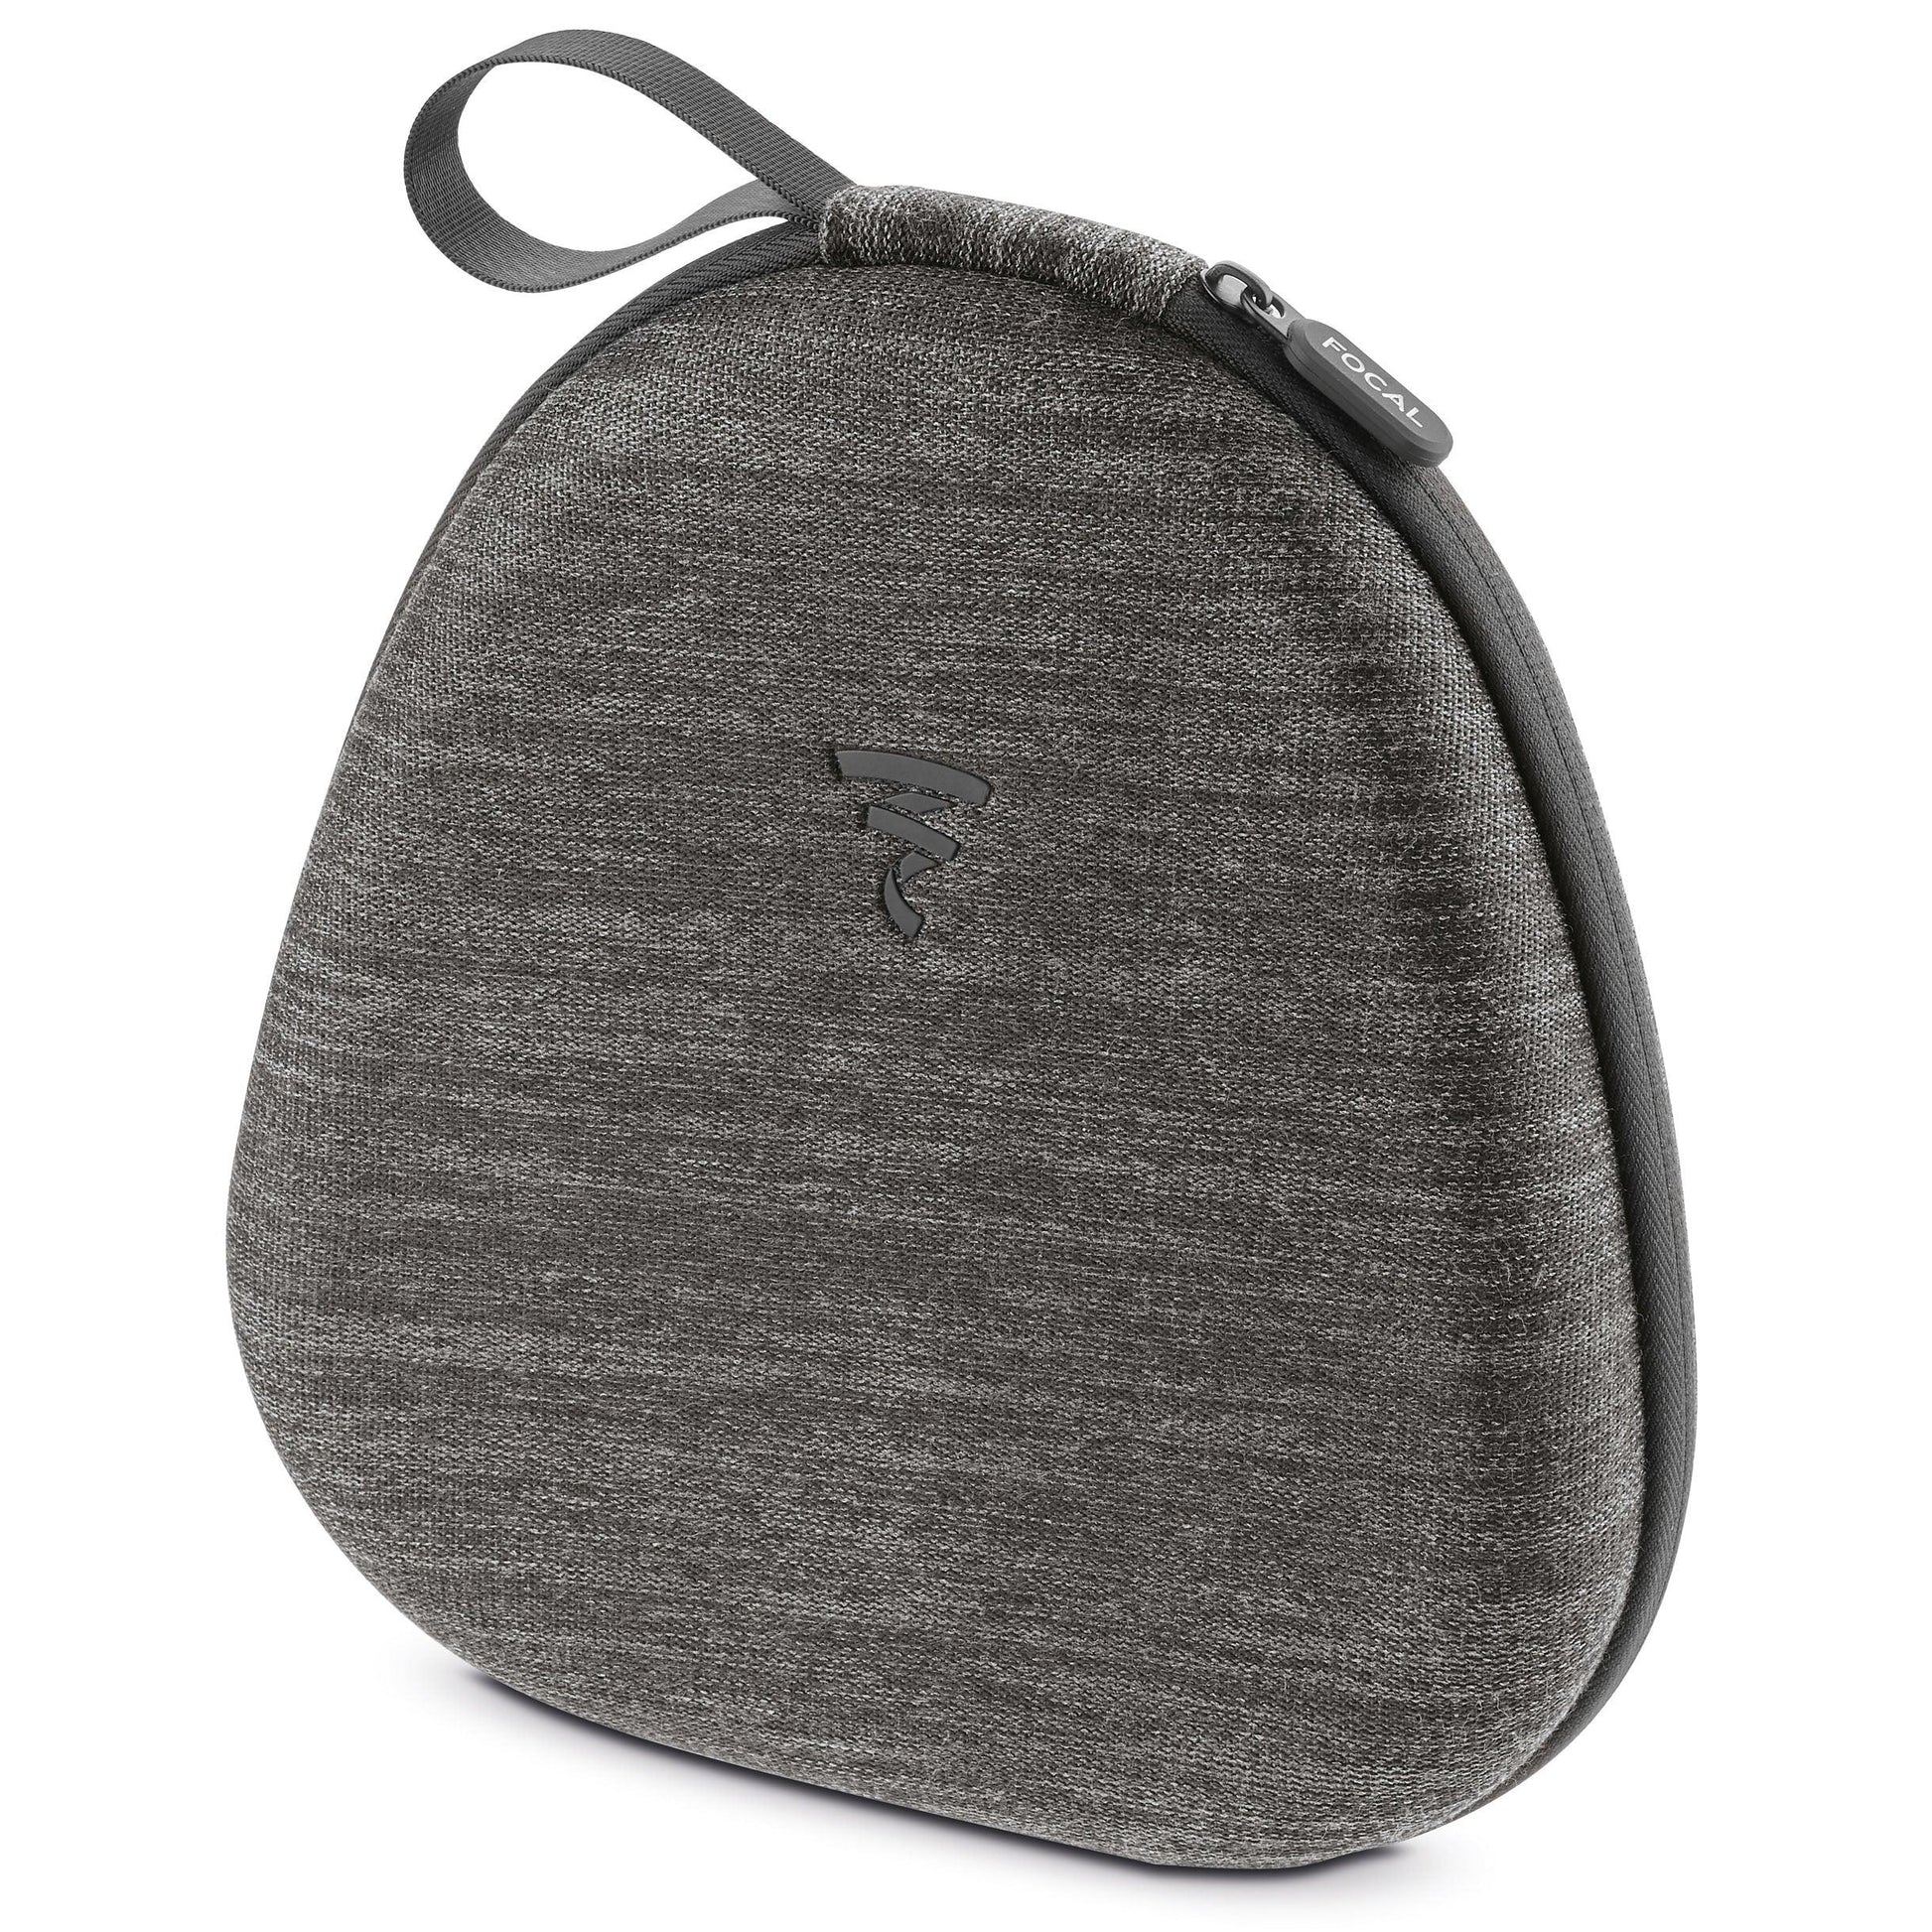 Carrying case for Focal Bathys wireless noise-cancelling bluetooth hifi headphones